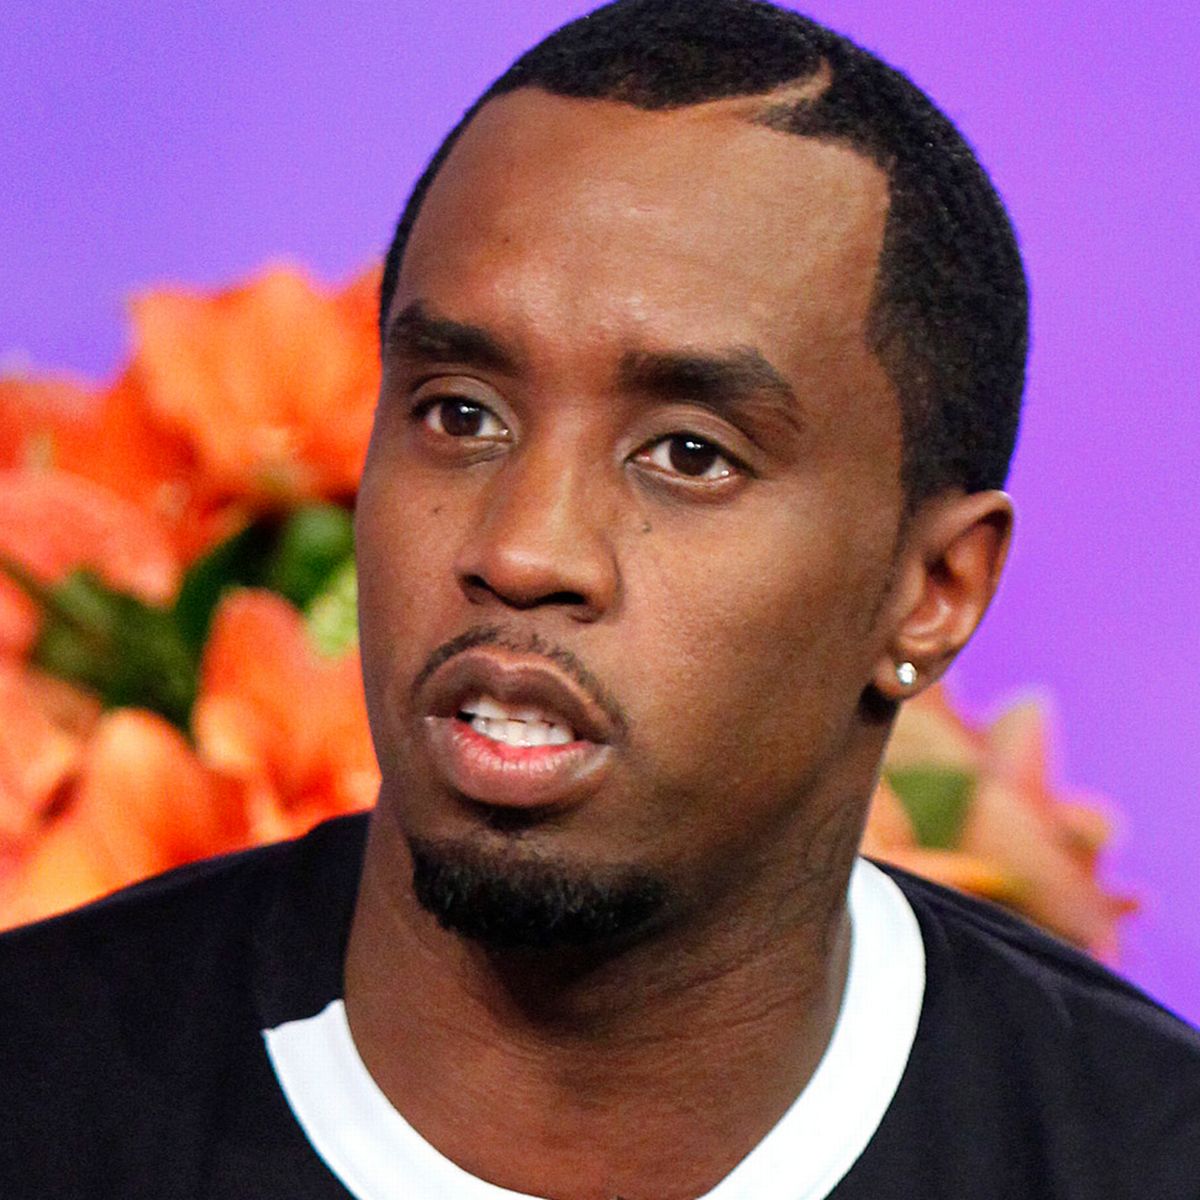 P. diddy Net Worth, Income & Salary